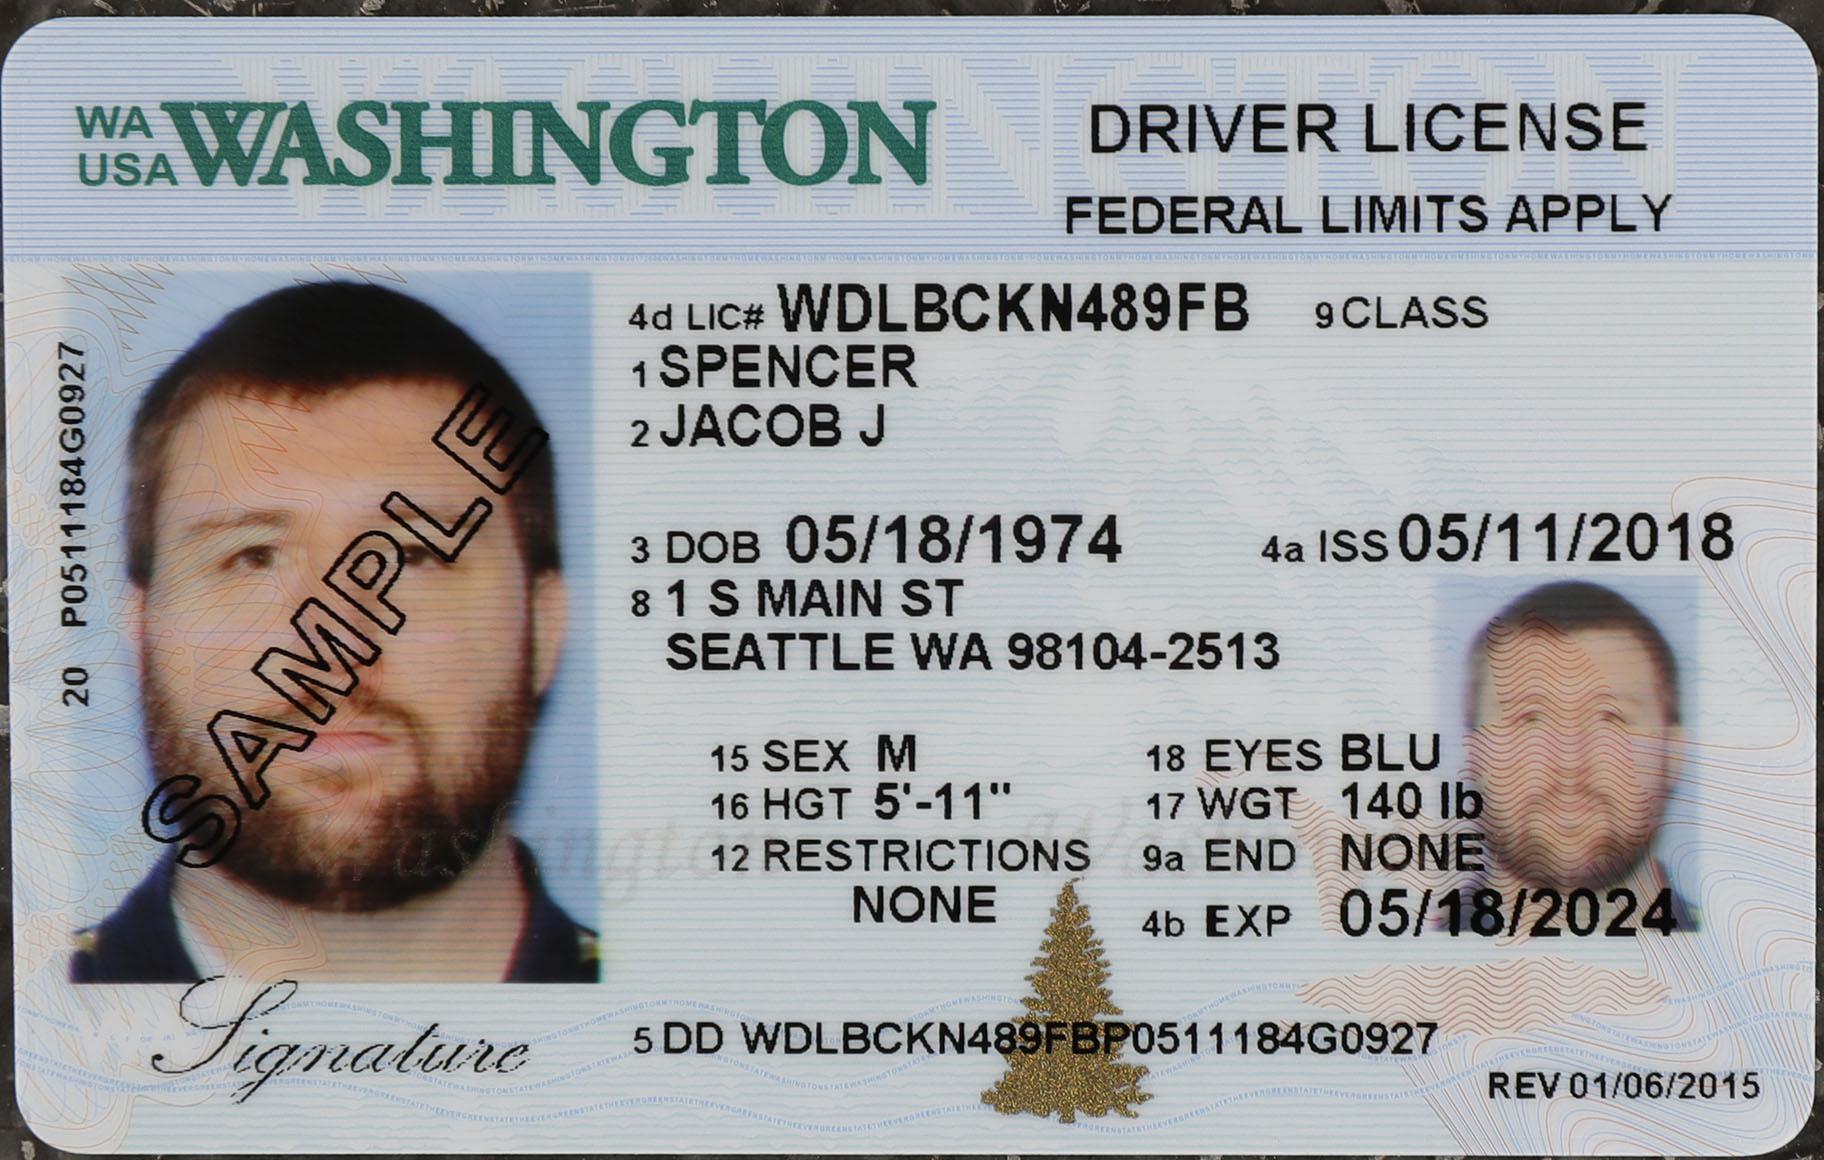 In this June 22, 2018, file photo, a sample copy of a Washington driver’s license is shown at the Washington state Department of Licensing office in Lacey, Wash. (AP Photo / Ted S. Warren, File)